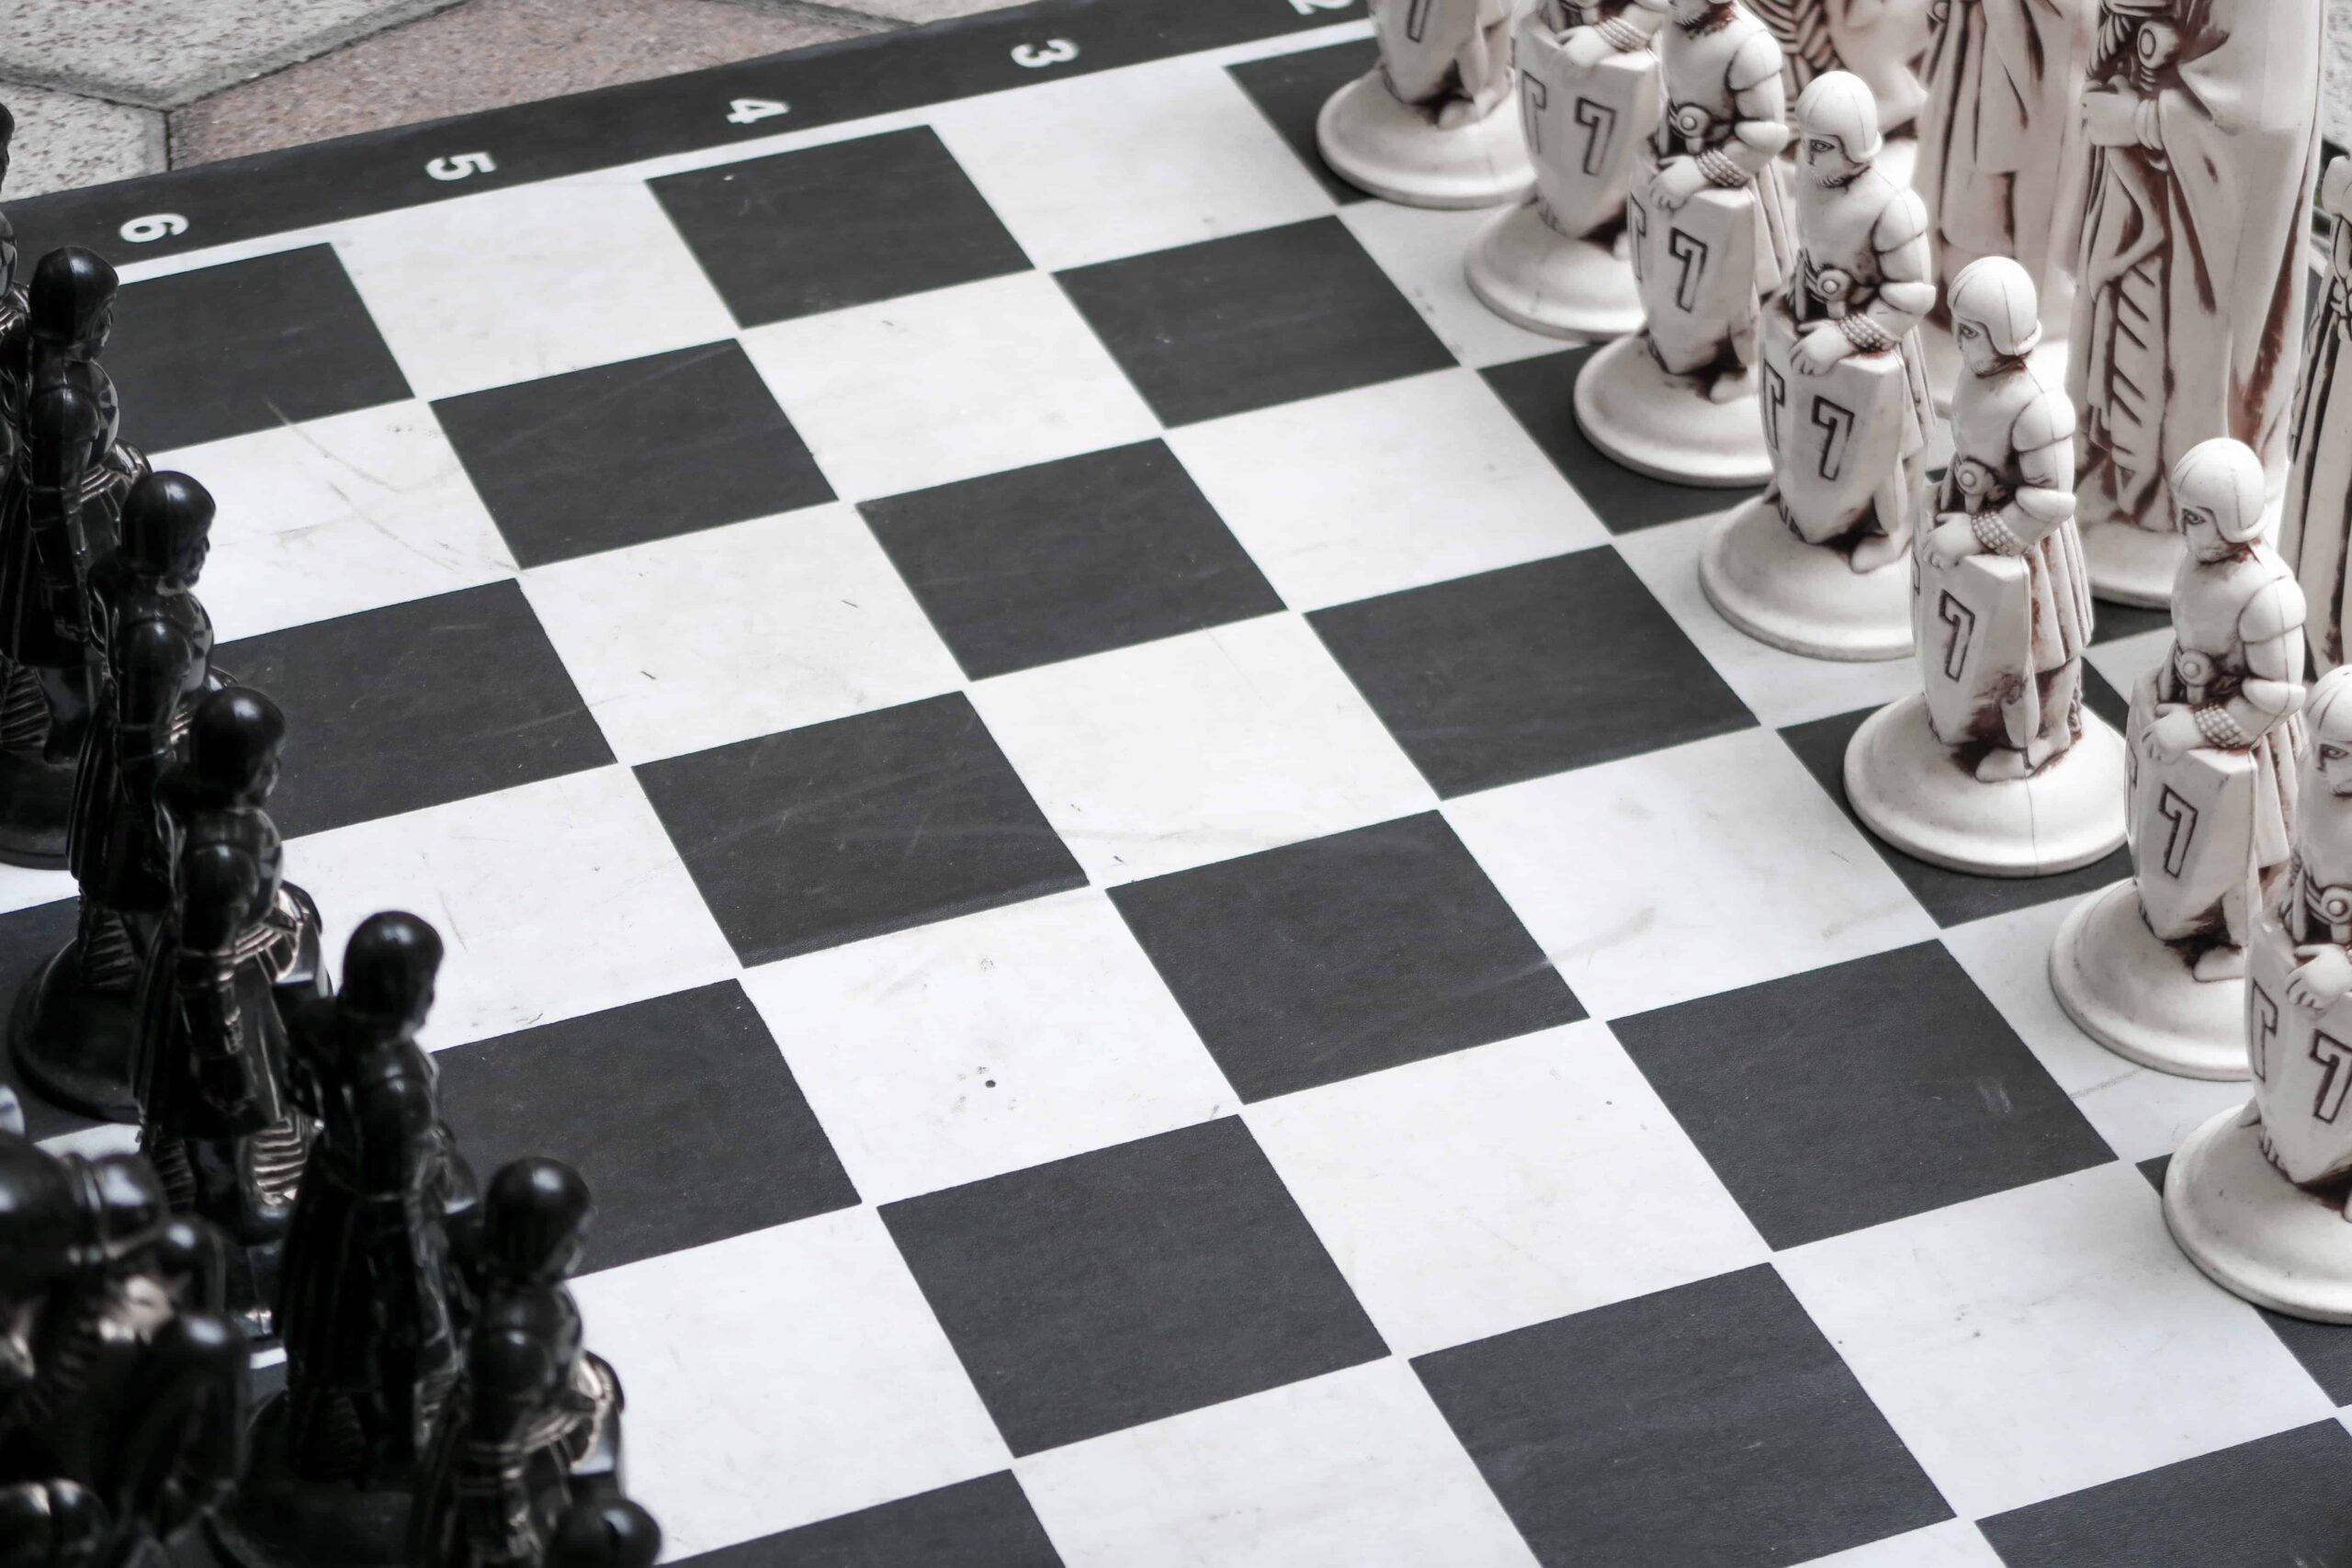 how do you set up a chess board